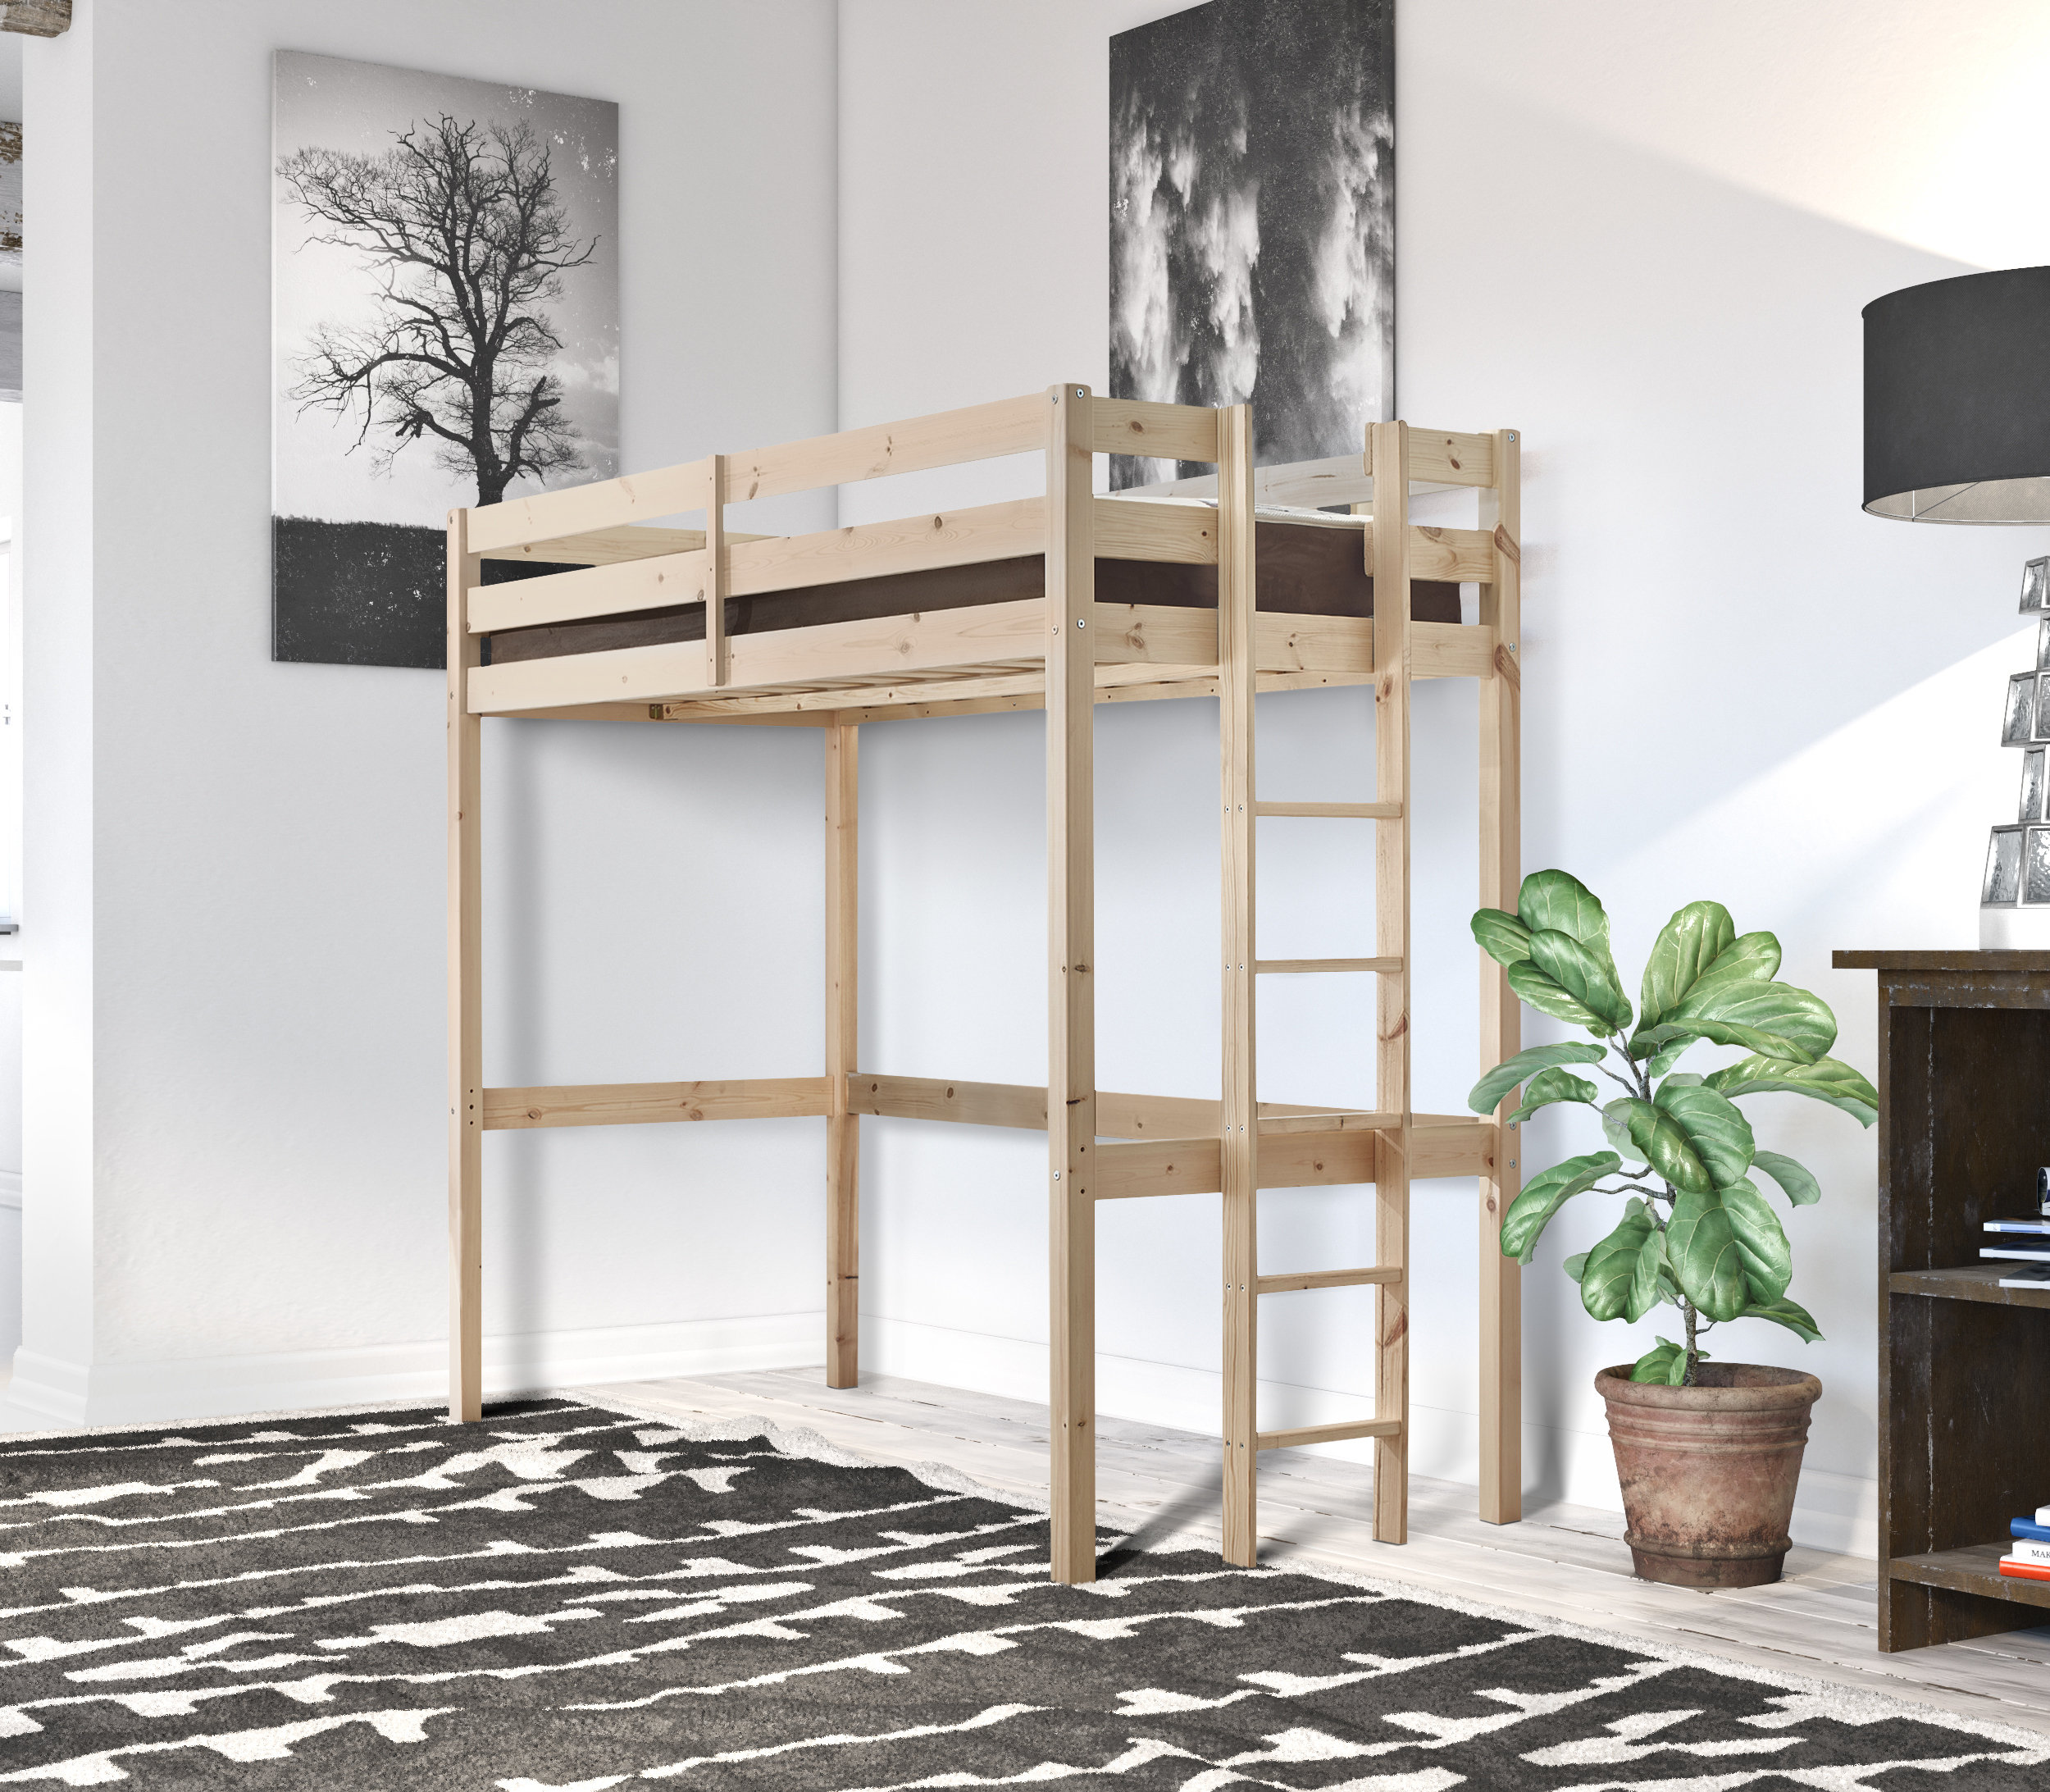 Just Kids Solid Wood Loft Bed Bed By Just Kids & Reviews | Wayfair.Co.Uk